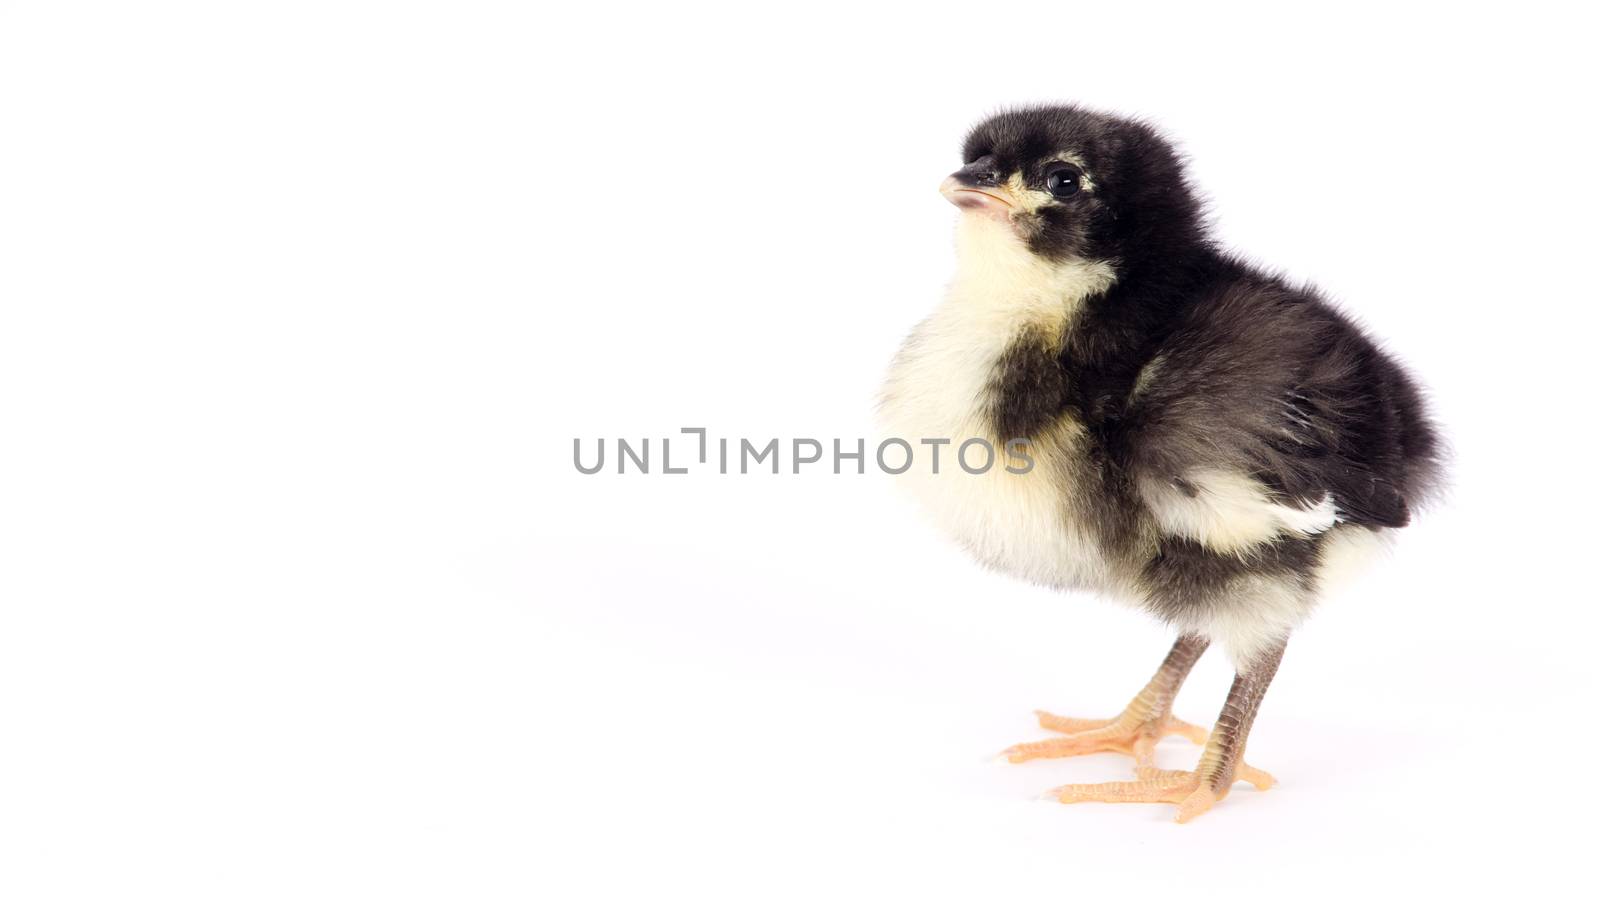 An Australian Baby Chicken Stands Alone Just a Few Days Old